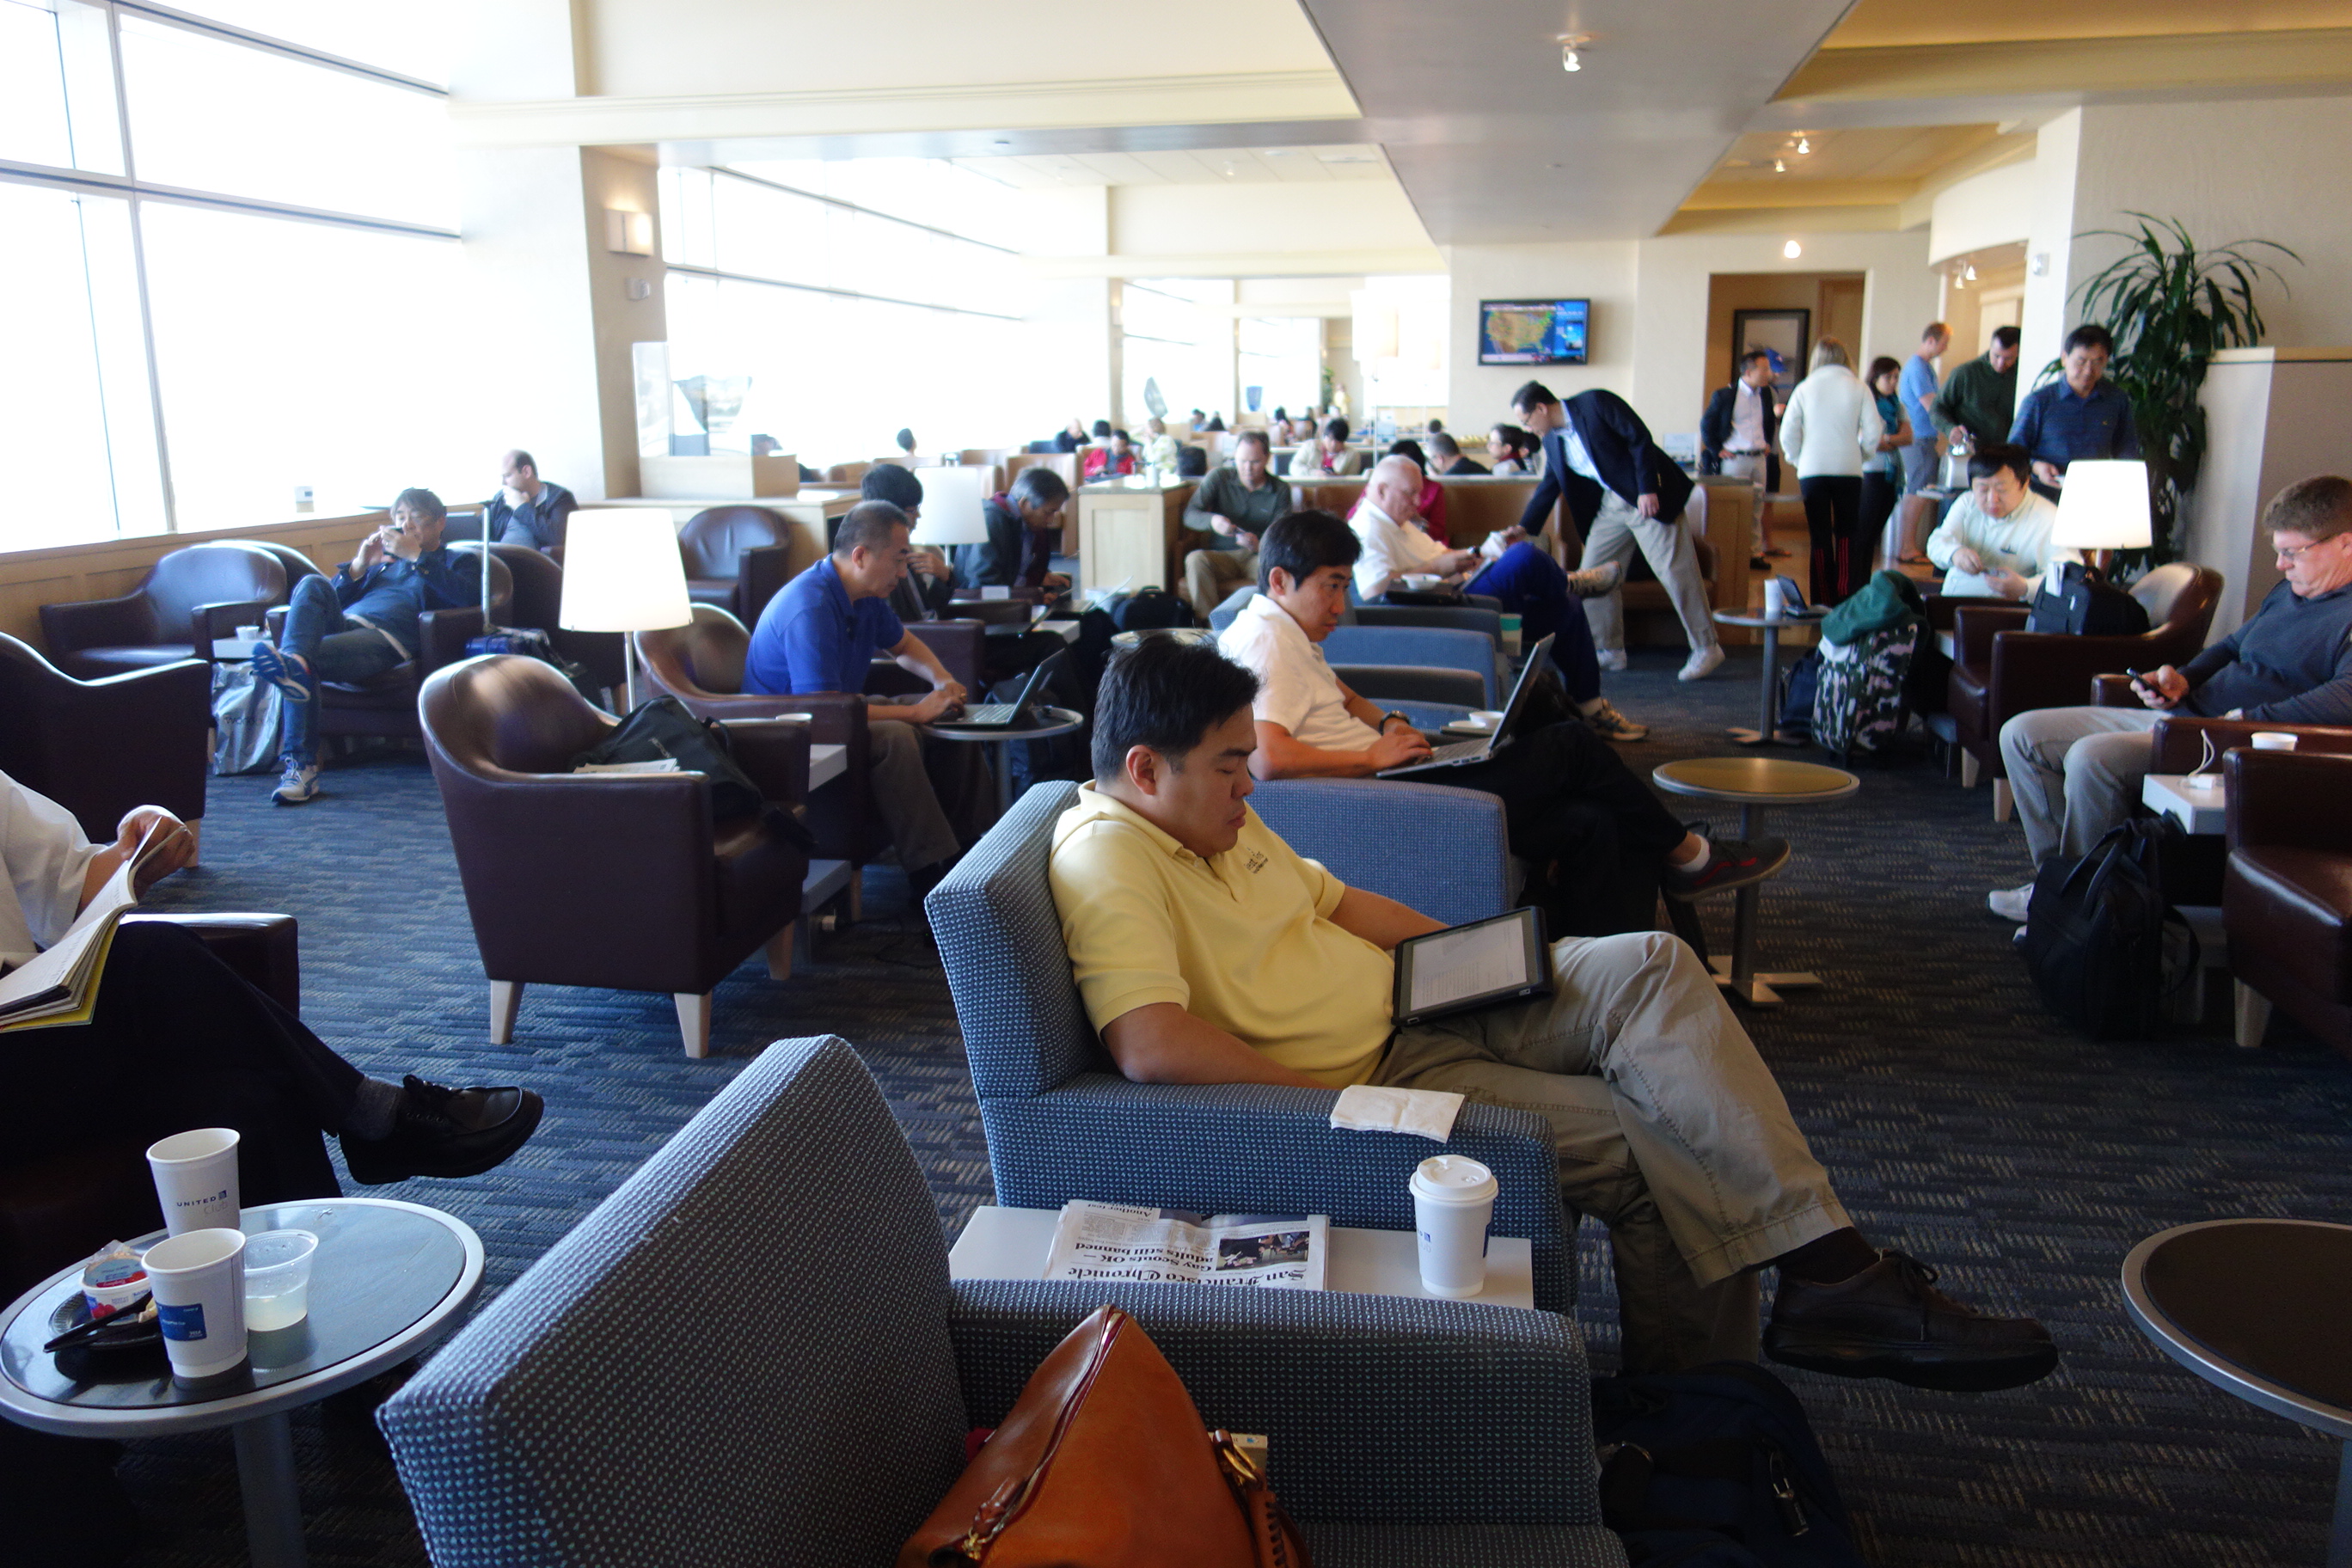 Crowded United Club. Hard to find a place to sit!